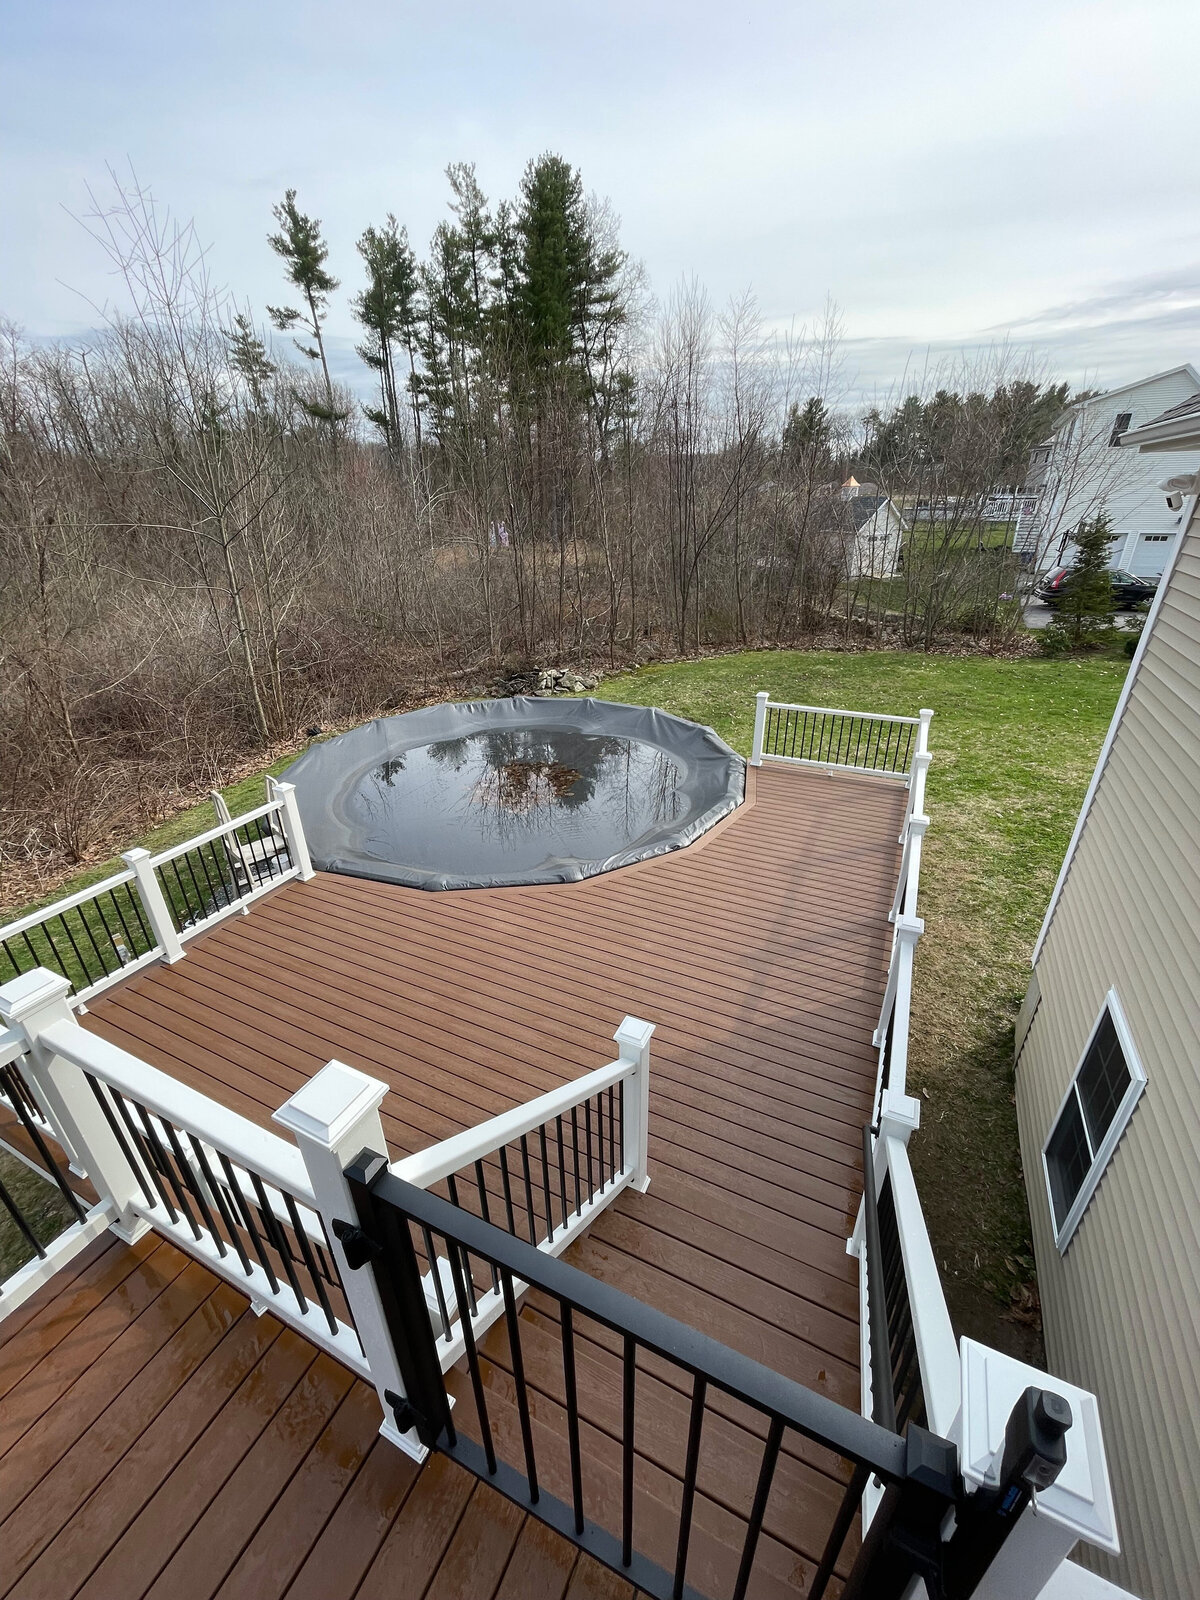 A view down onto a pool deck of brown composite around an above ground pool with a second tier designed by a Marlborough MA Deck Contractor